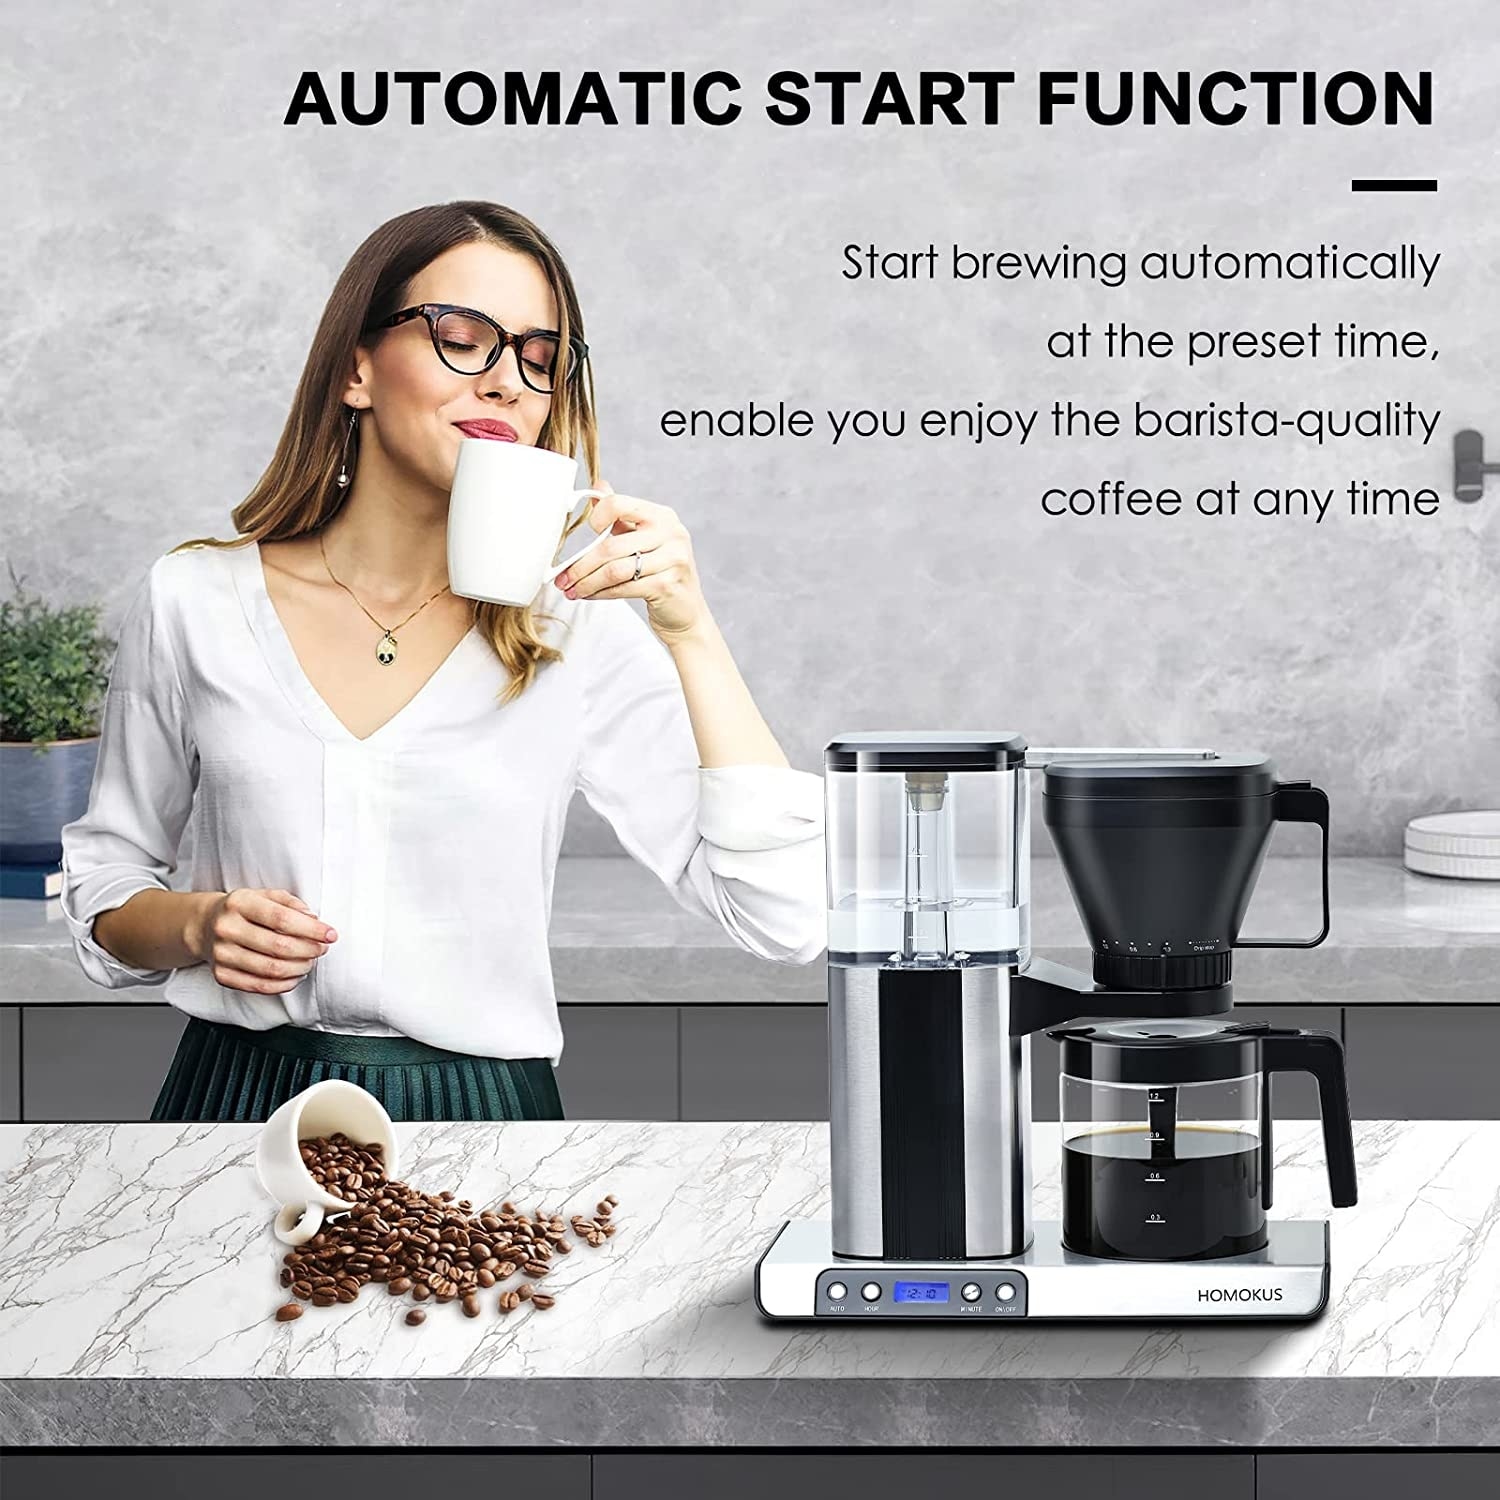 https://ak1.ostkcdn.com/images/products/is/images/direct/4a8747b49de0c320a373b902c367cb2cbbfdda61/8-Cup-Drip-Coffee-Maker---Stainless-Steel-Coffee-Maker---Programmable-Coffee-Maker-with-Timer.jpg